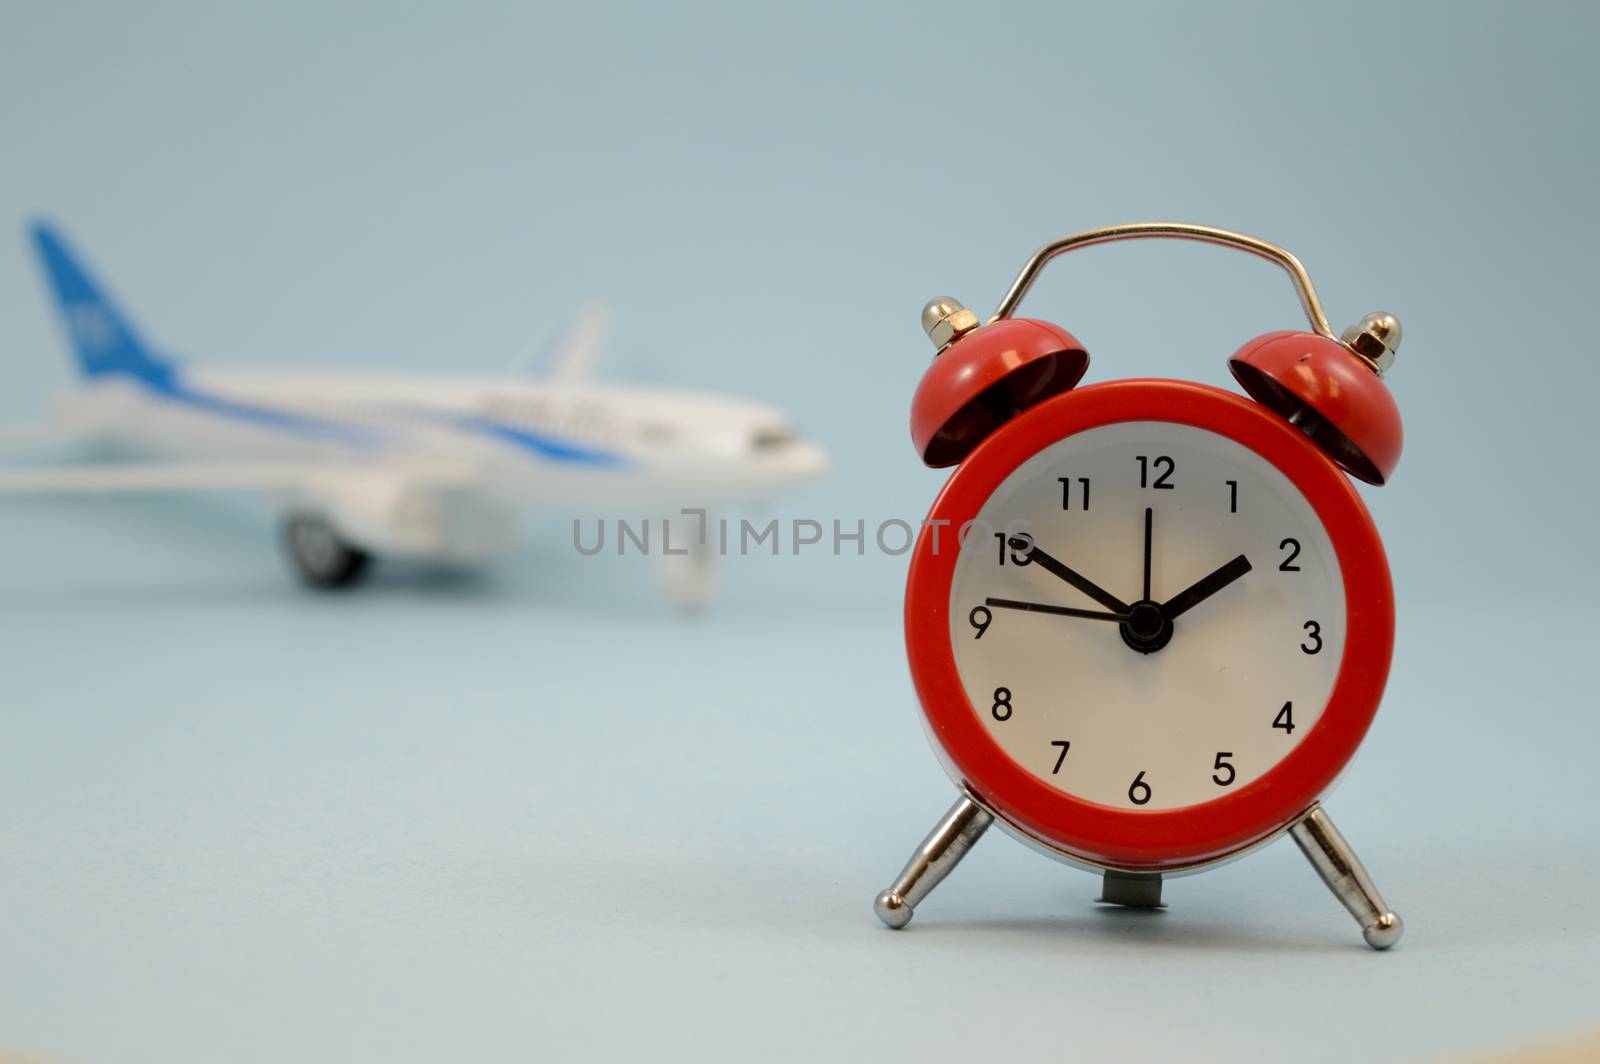 A simple still-life showing an airplane and clock for several travel concepts.